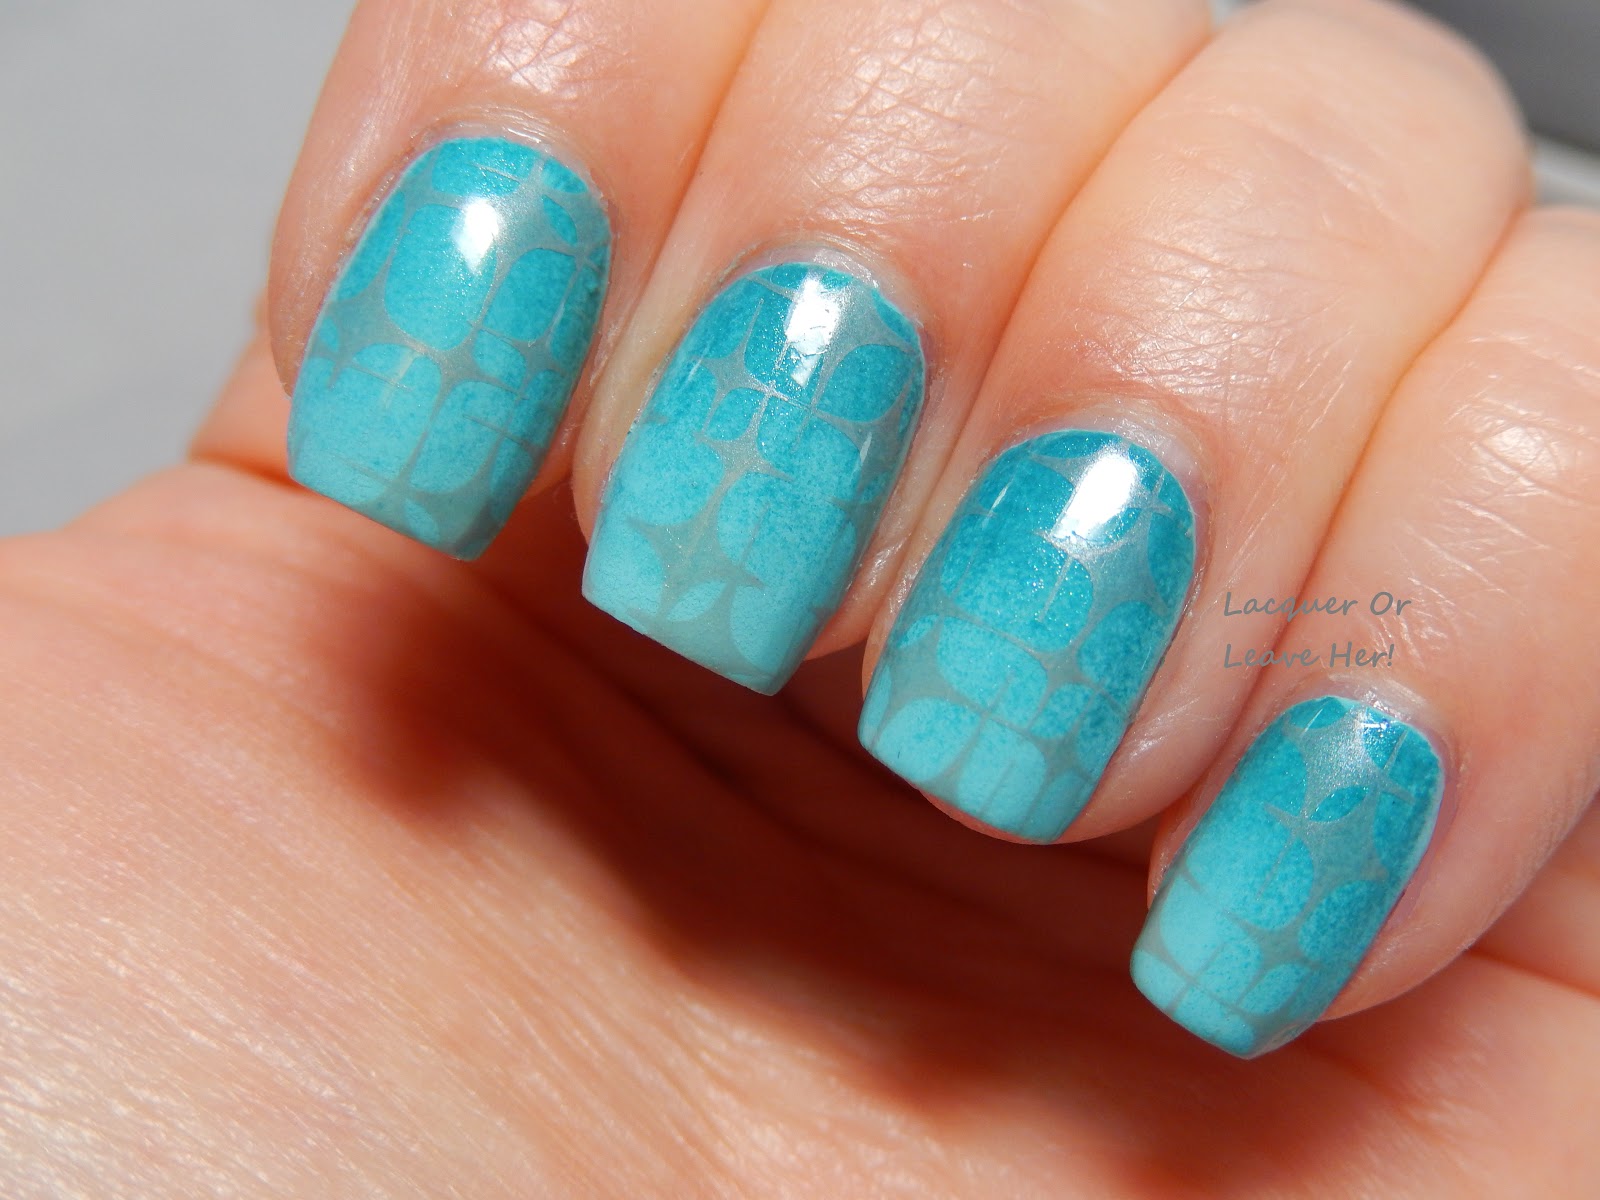 Lacquer or Leave Her!: Tutorial: Stamping vertical lines over a gradient